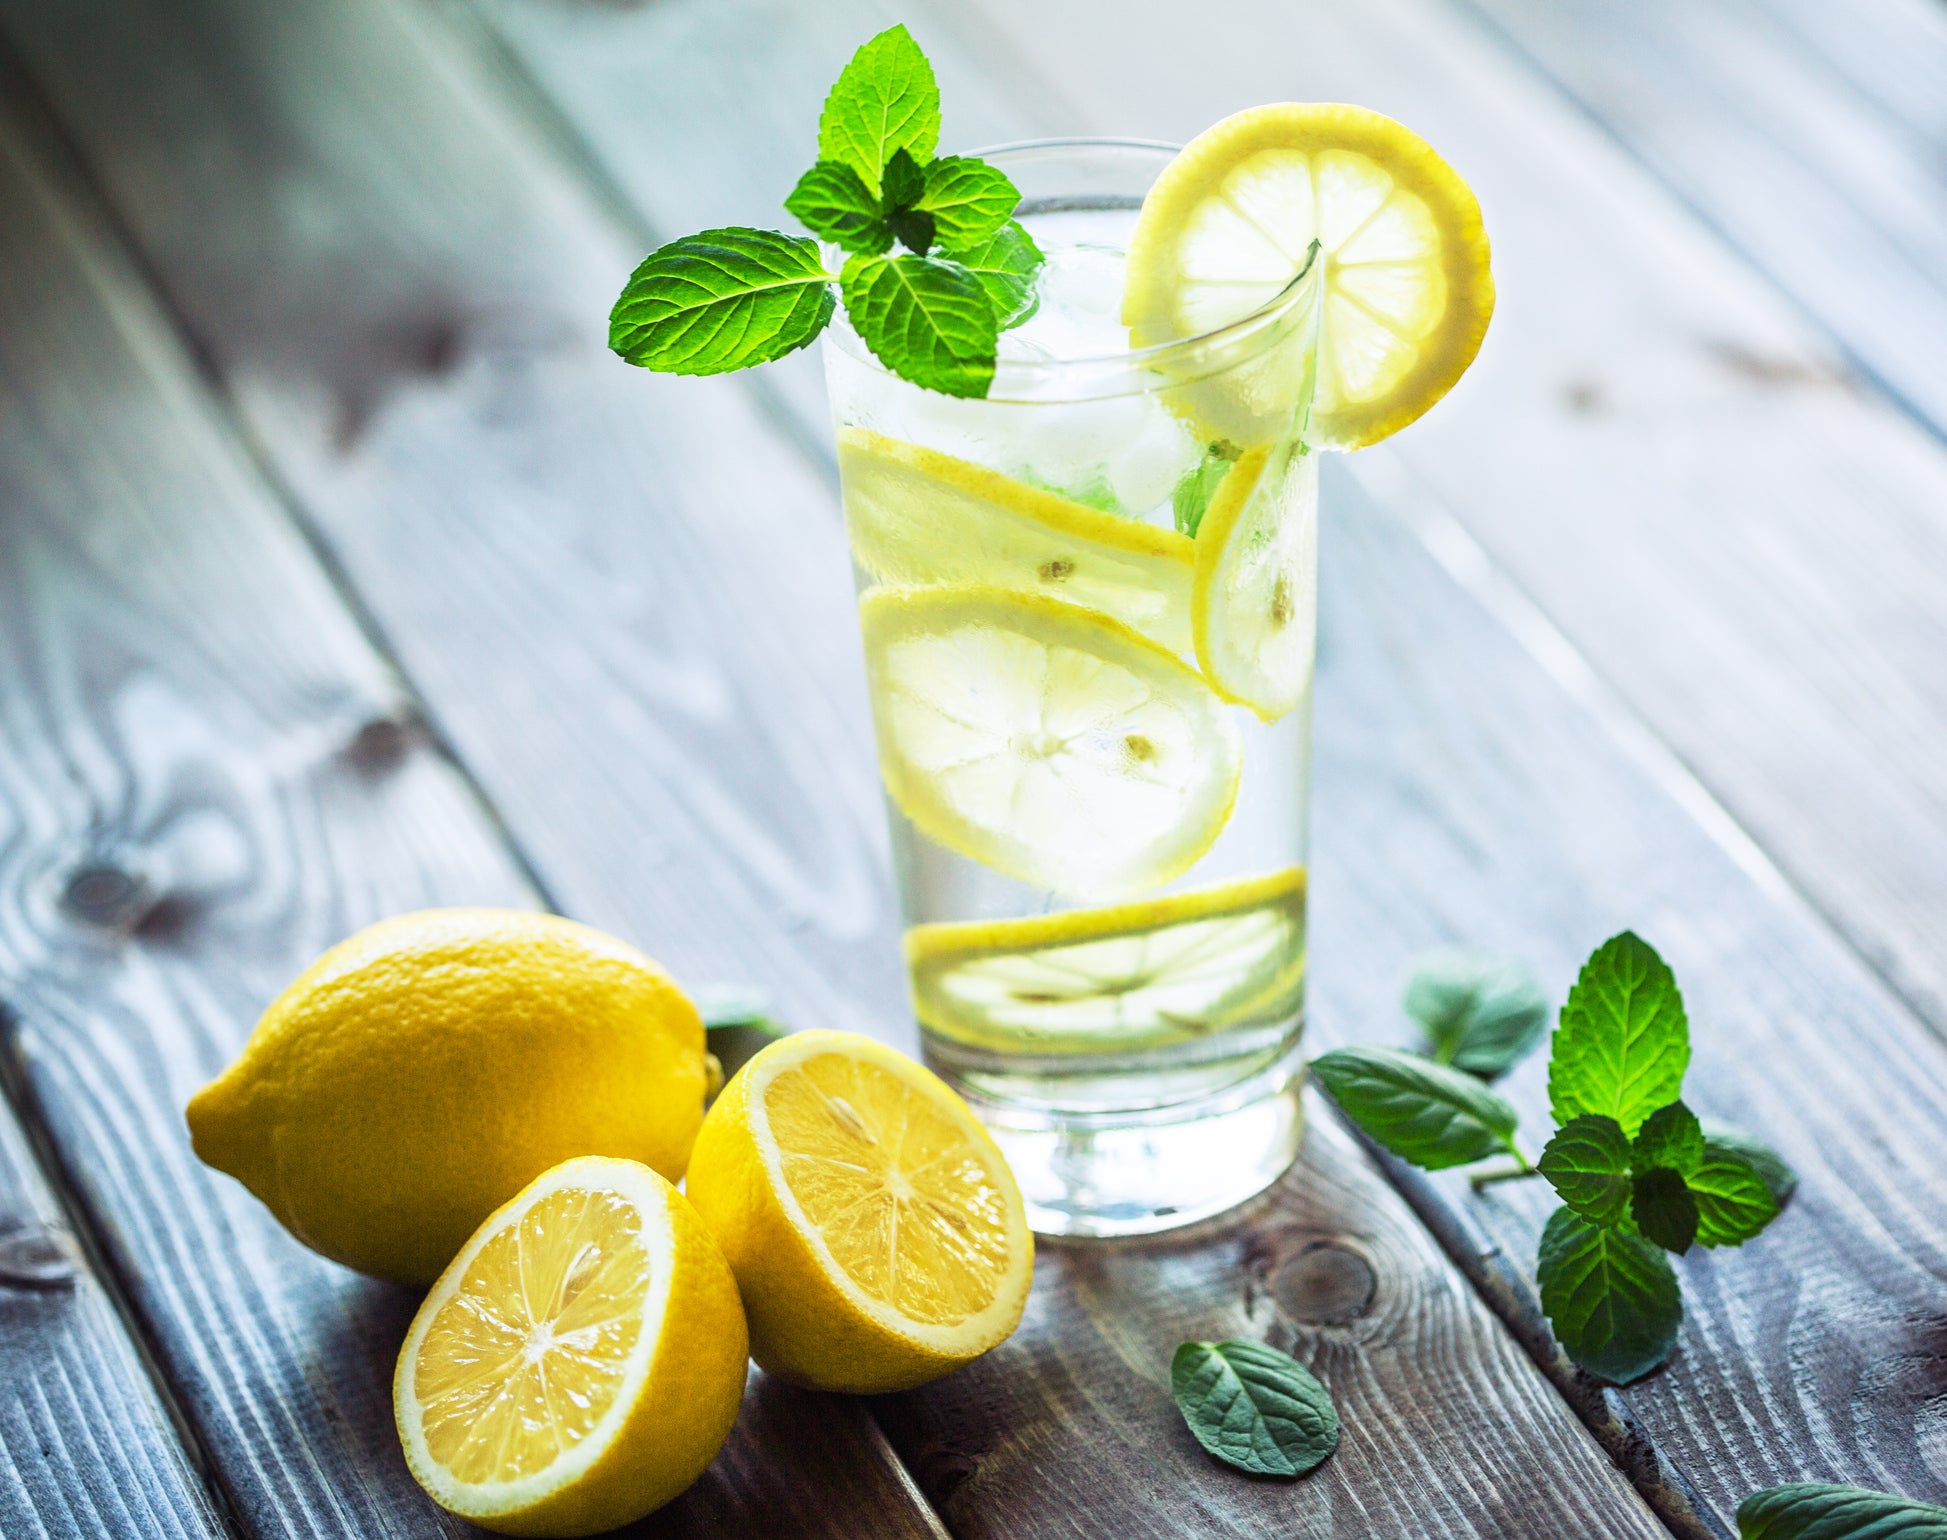 The popularity of water with lemon has reached a fever pitch this year